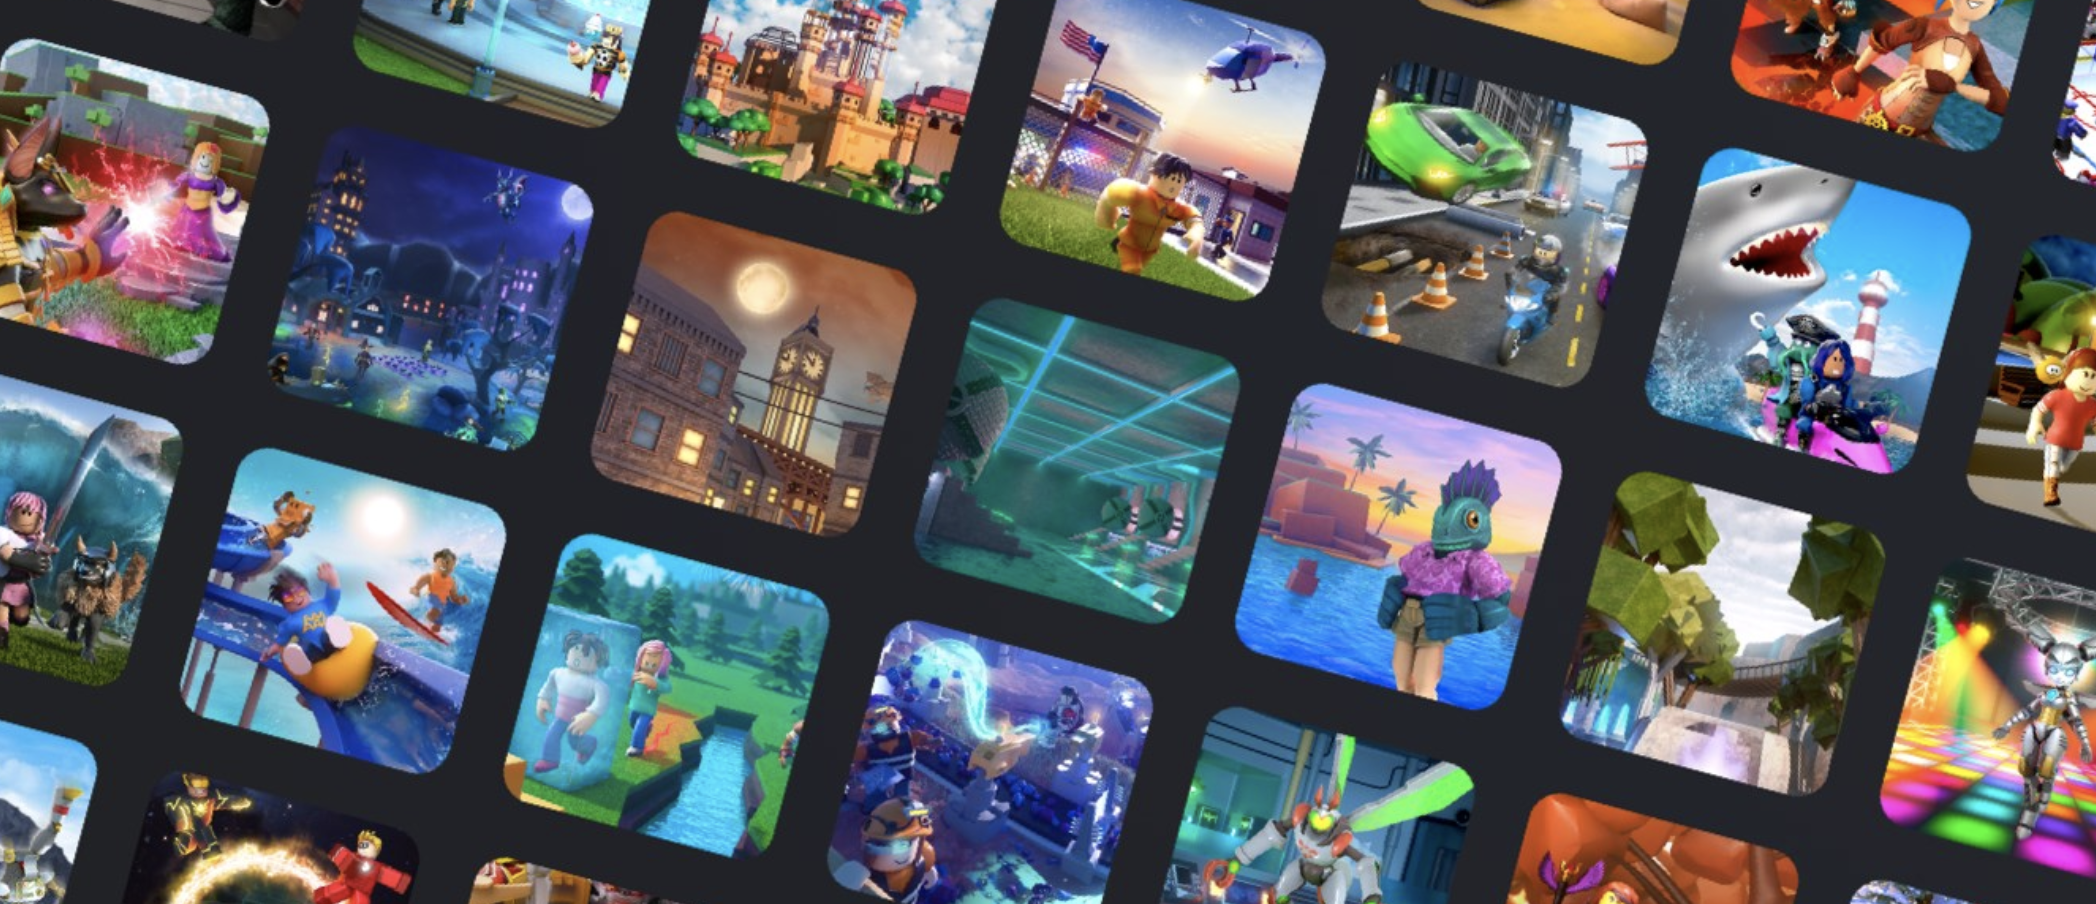 Roblox says games back online after 3-day outage - CNET